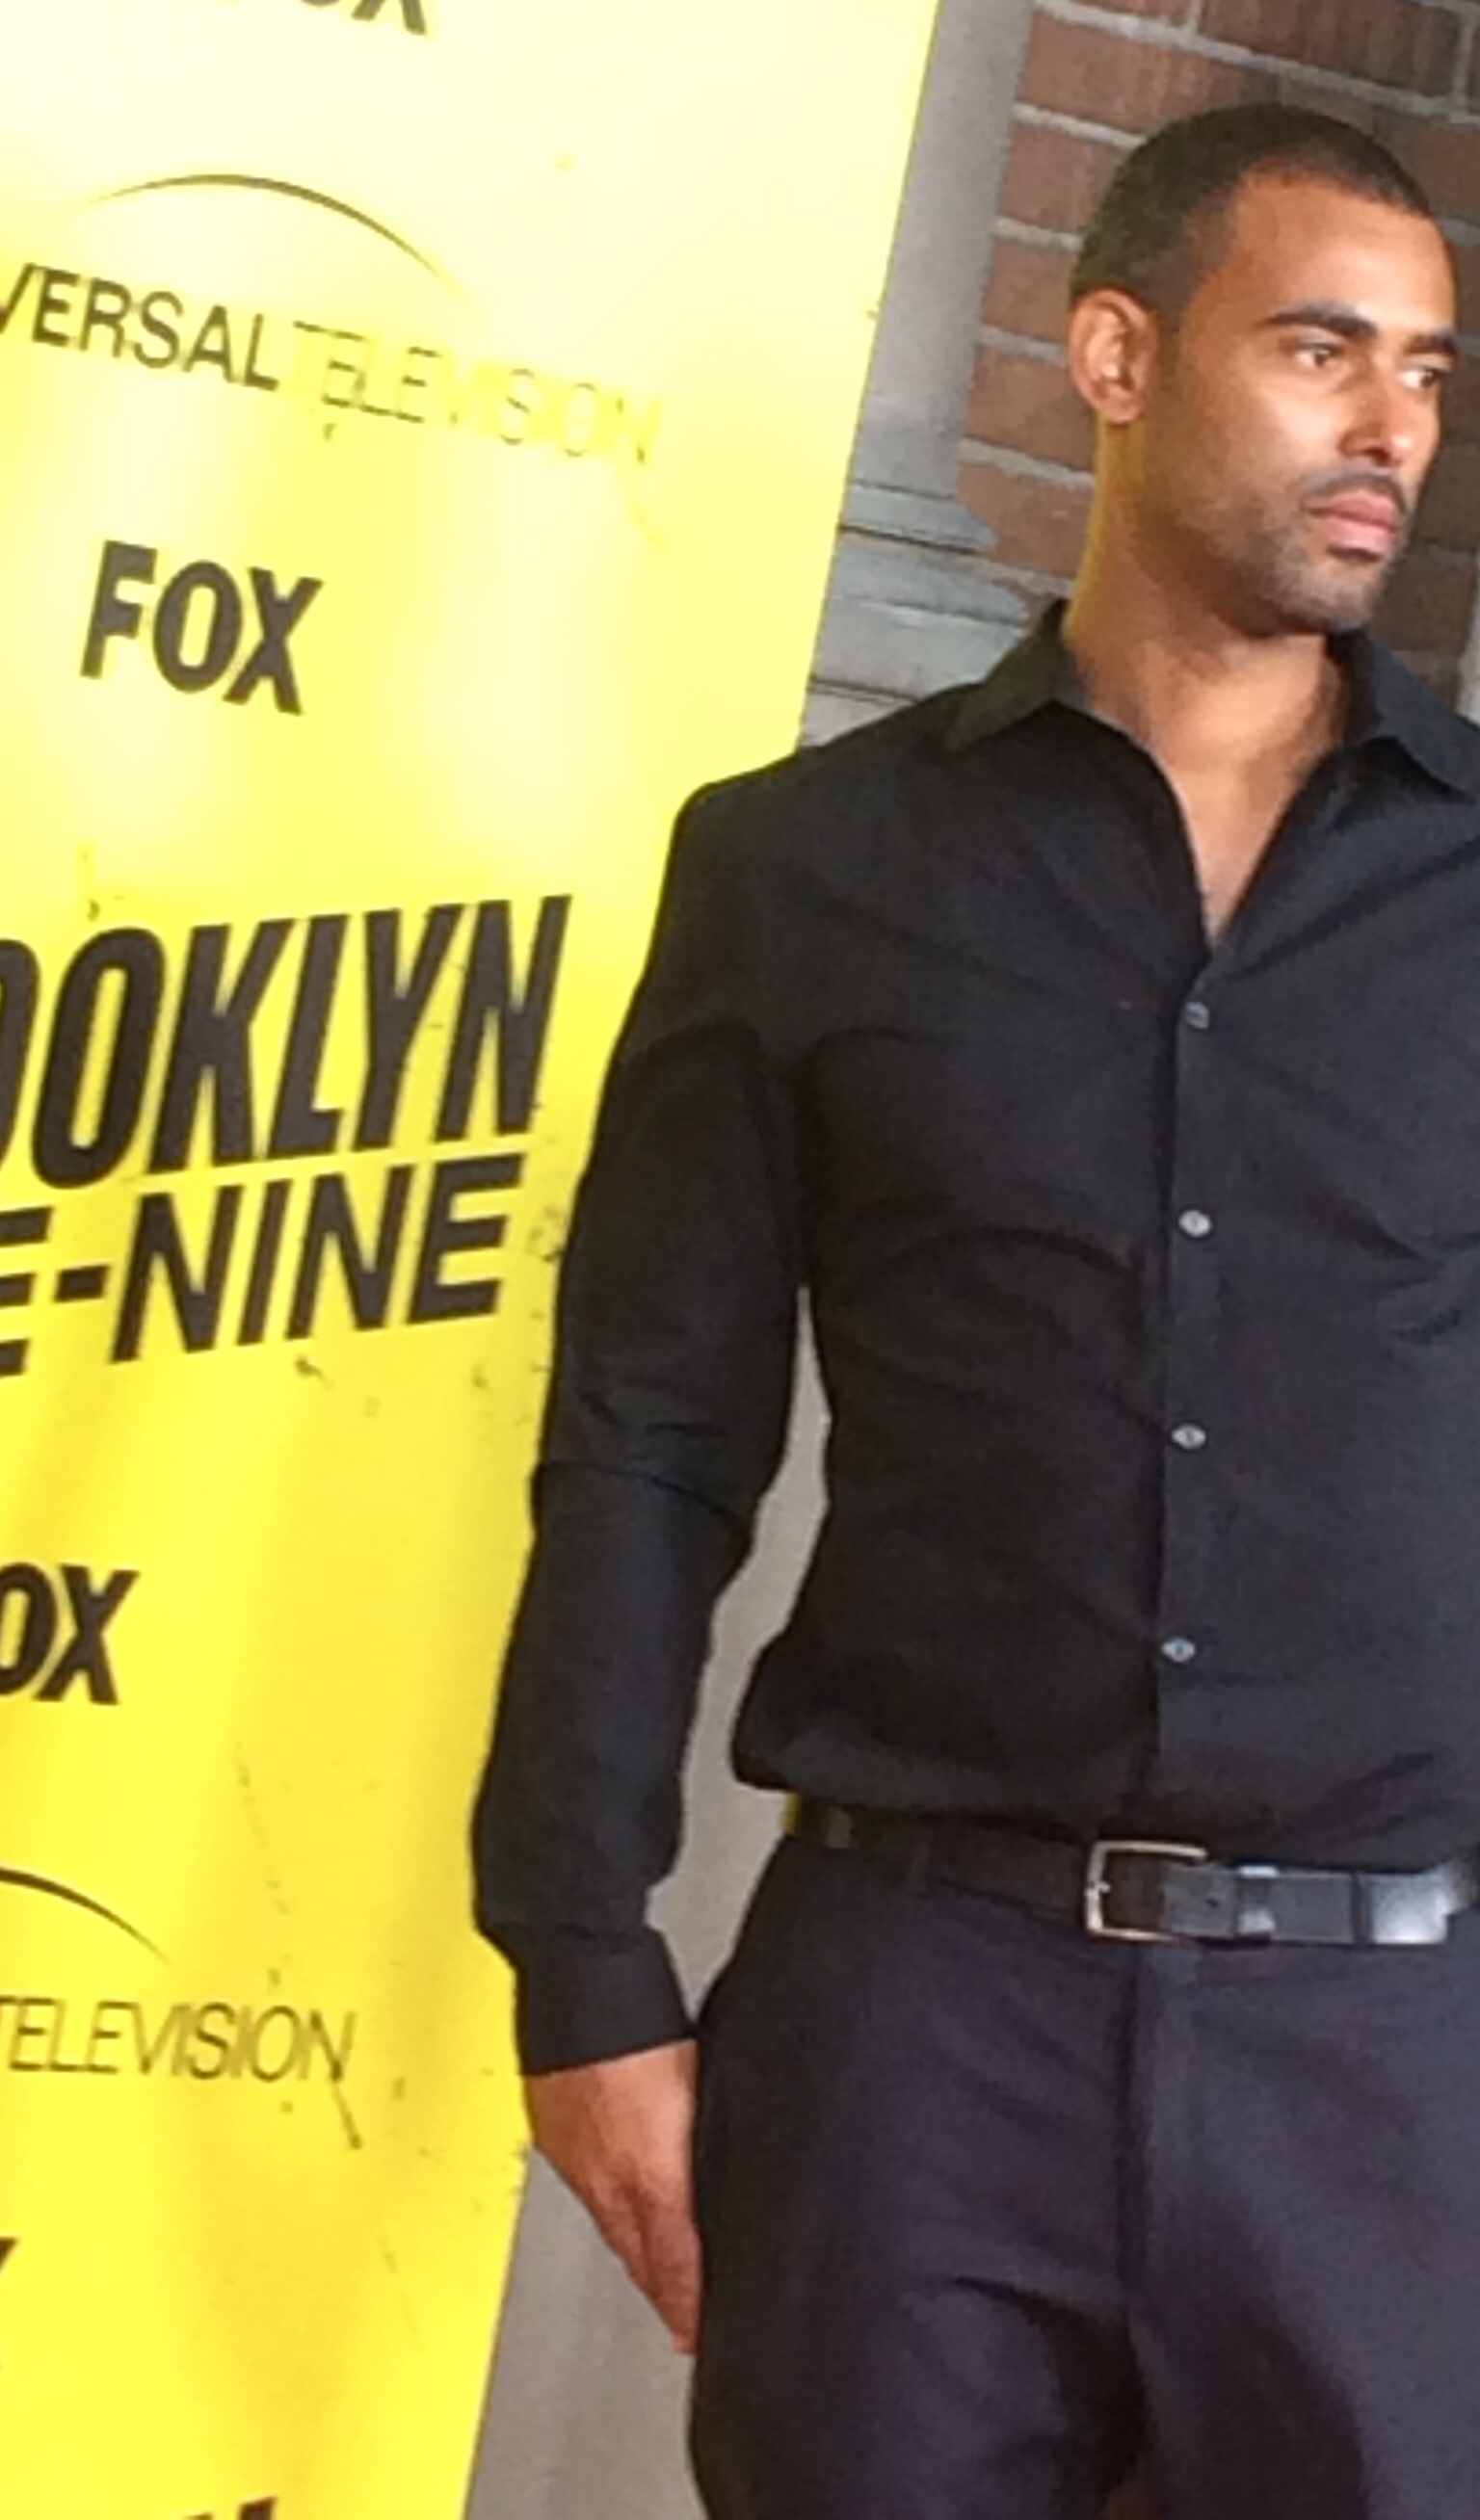 At The 'Brooklyn Nine-Nine' Red Carpet Event